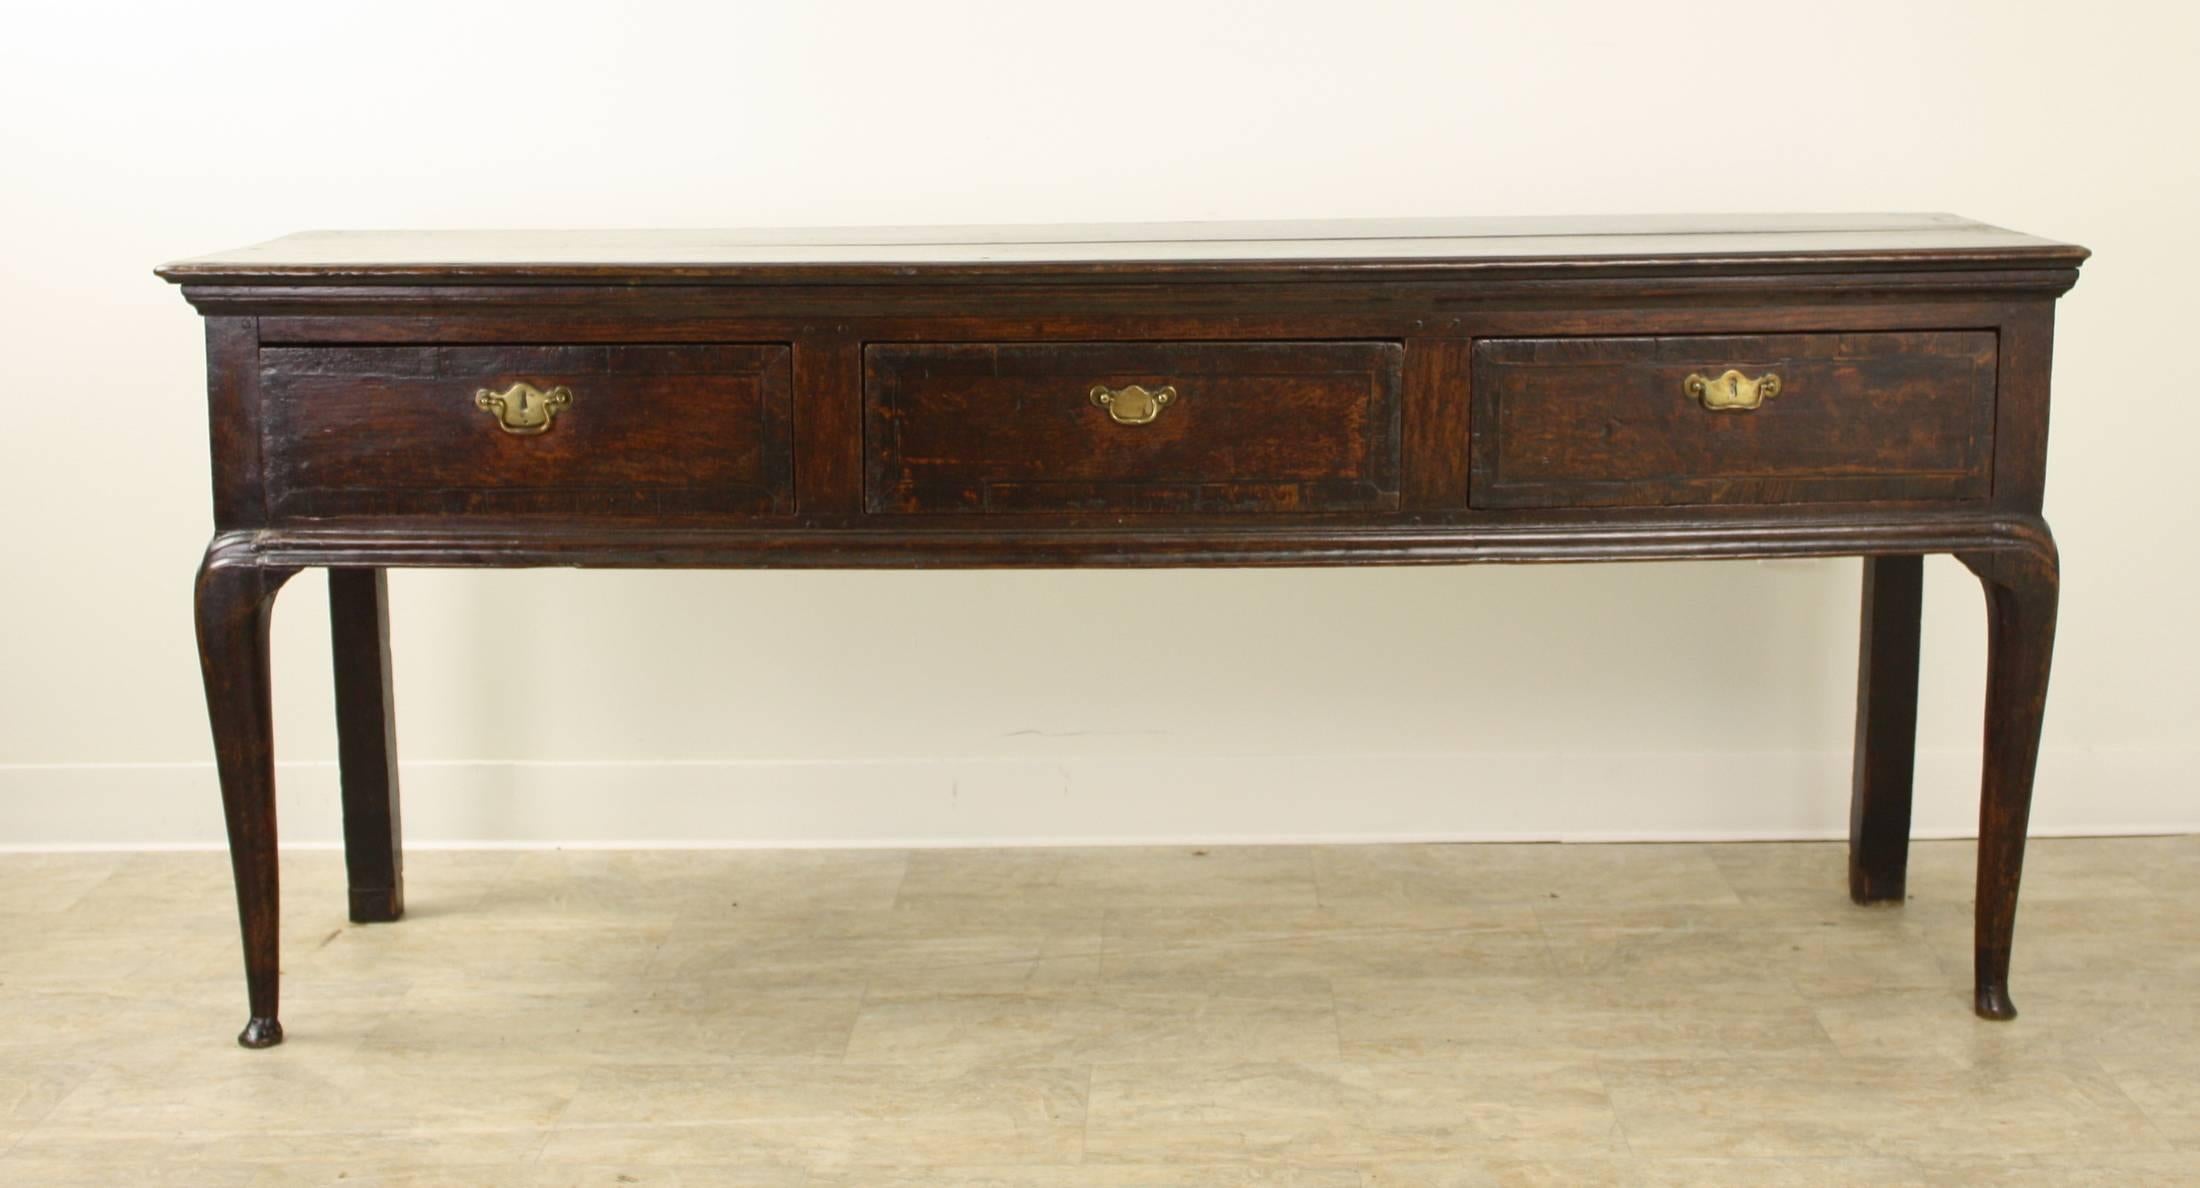 This dark oak server is an outstanding look. Wonderful moldings above and below the apron, and all around the top. There are three drawers, each with an original brass handle of the period. The front legs are shaped, and have little pad feet,